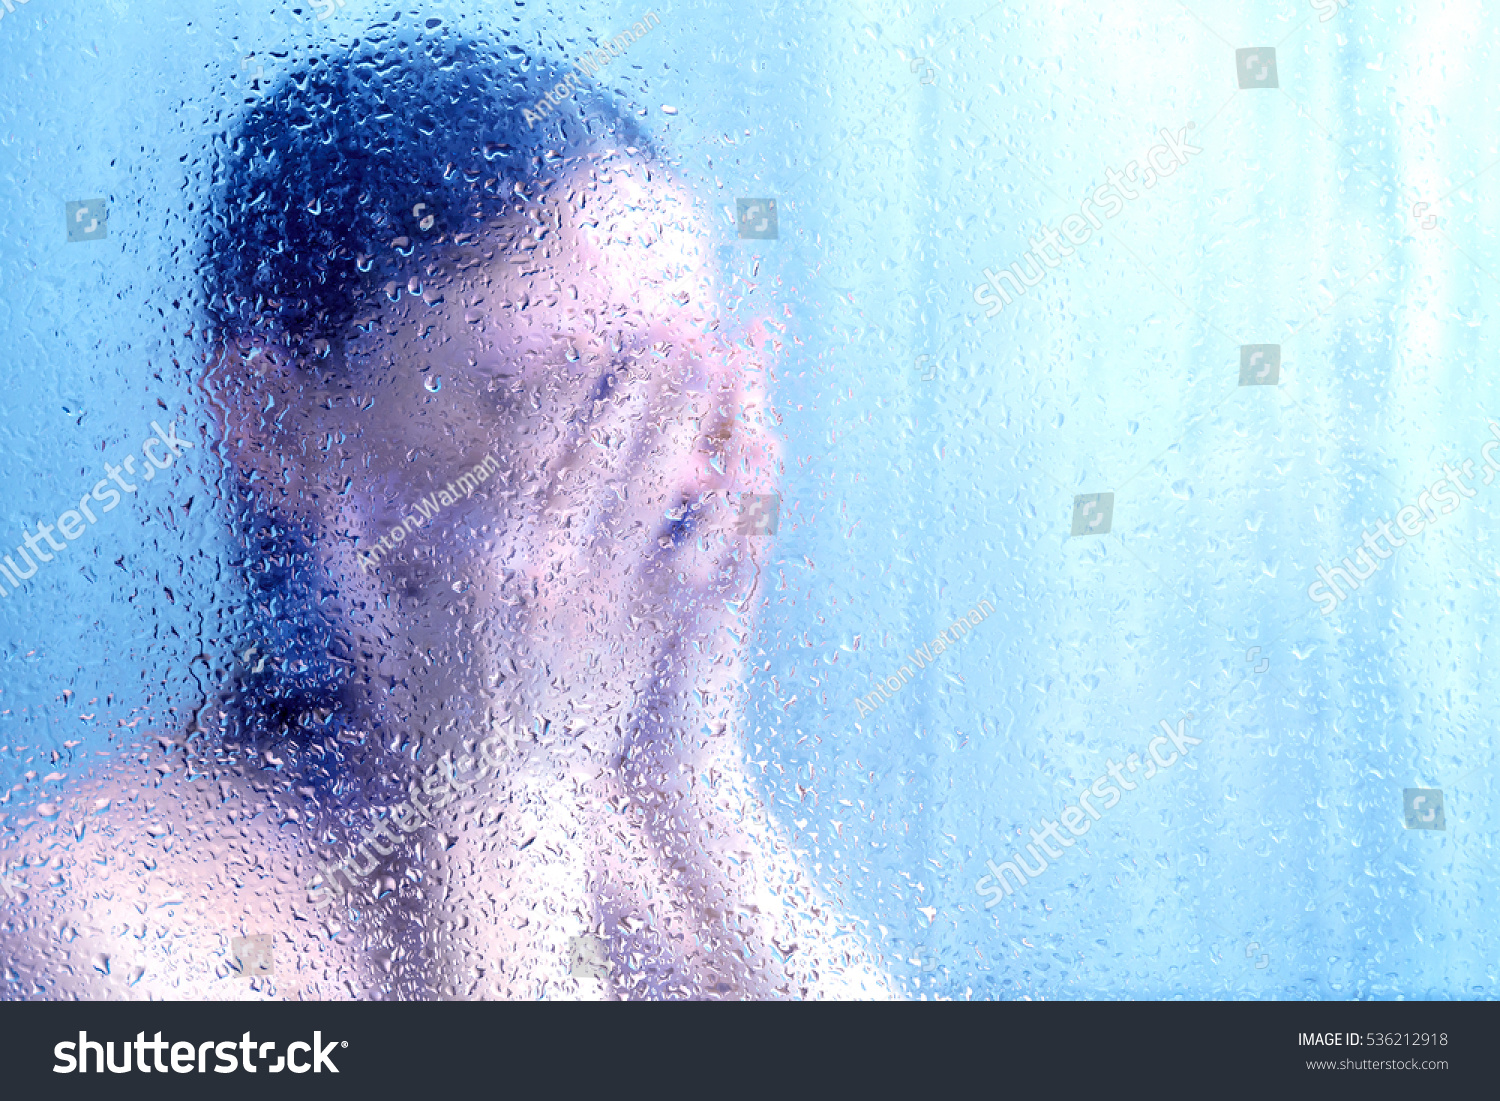 Beautiful woman in the shower behind glass with drops, blue glow #536212918